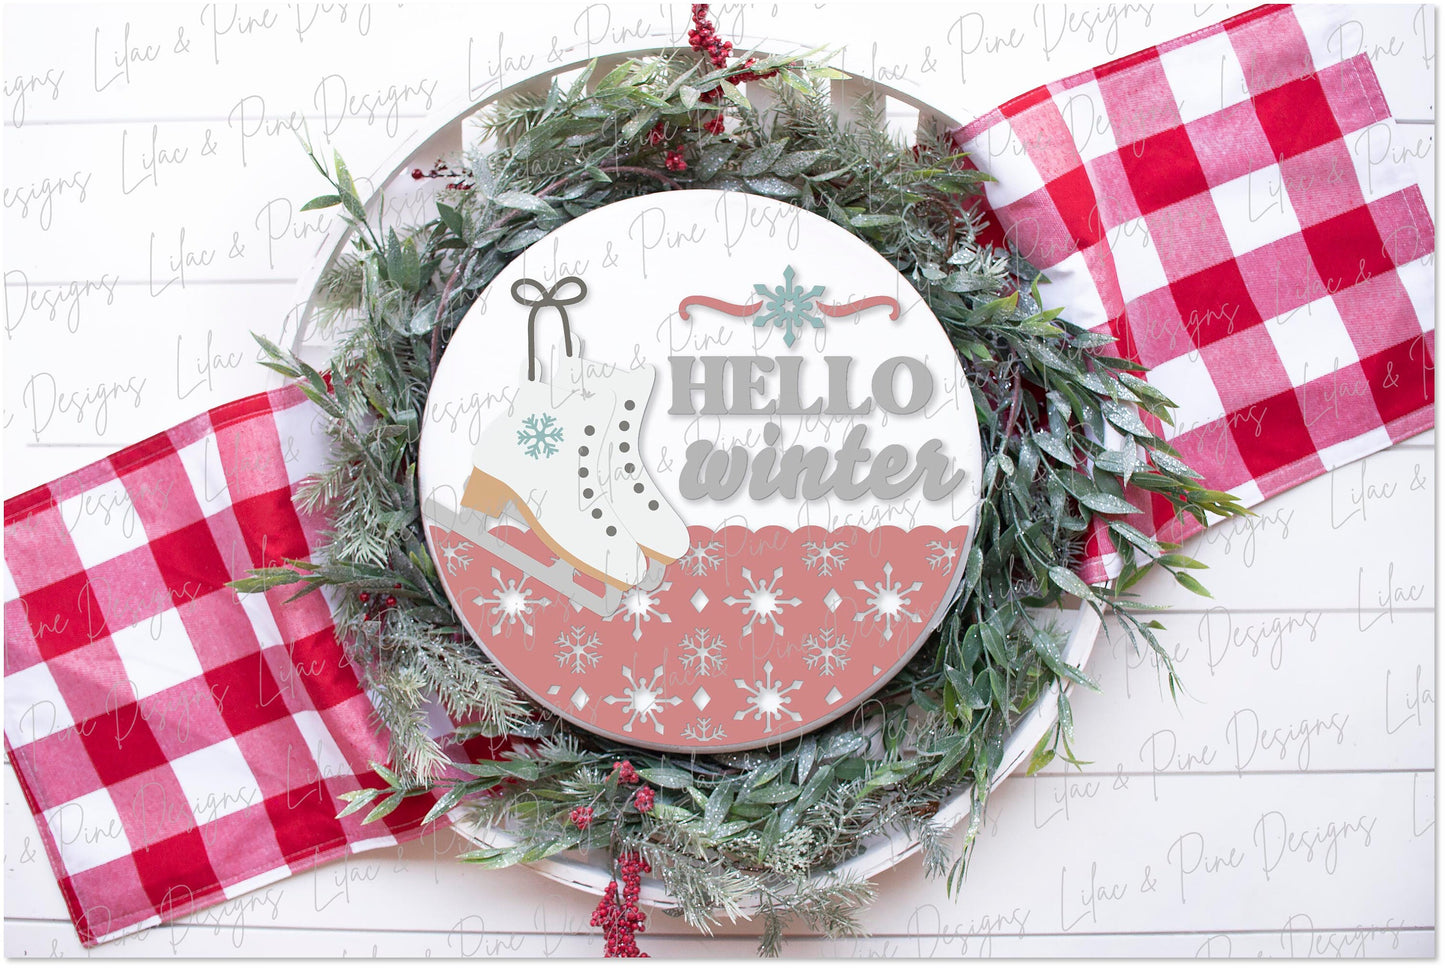 Hello winter sign SVG, Christmas welcome sign, Winter door hanger SVG, ice skates porch sign, snowflake decor, Glowforge Svg, laser cut file